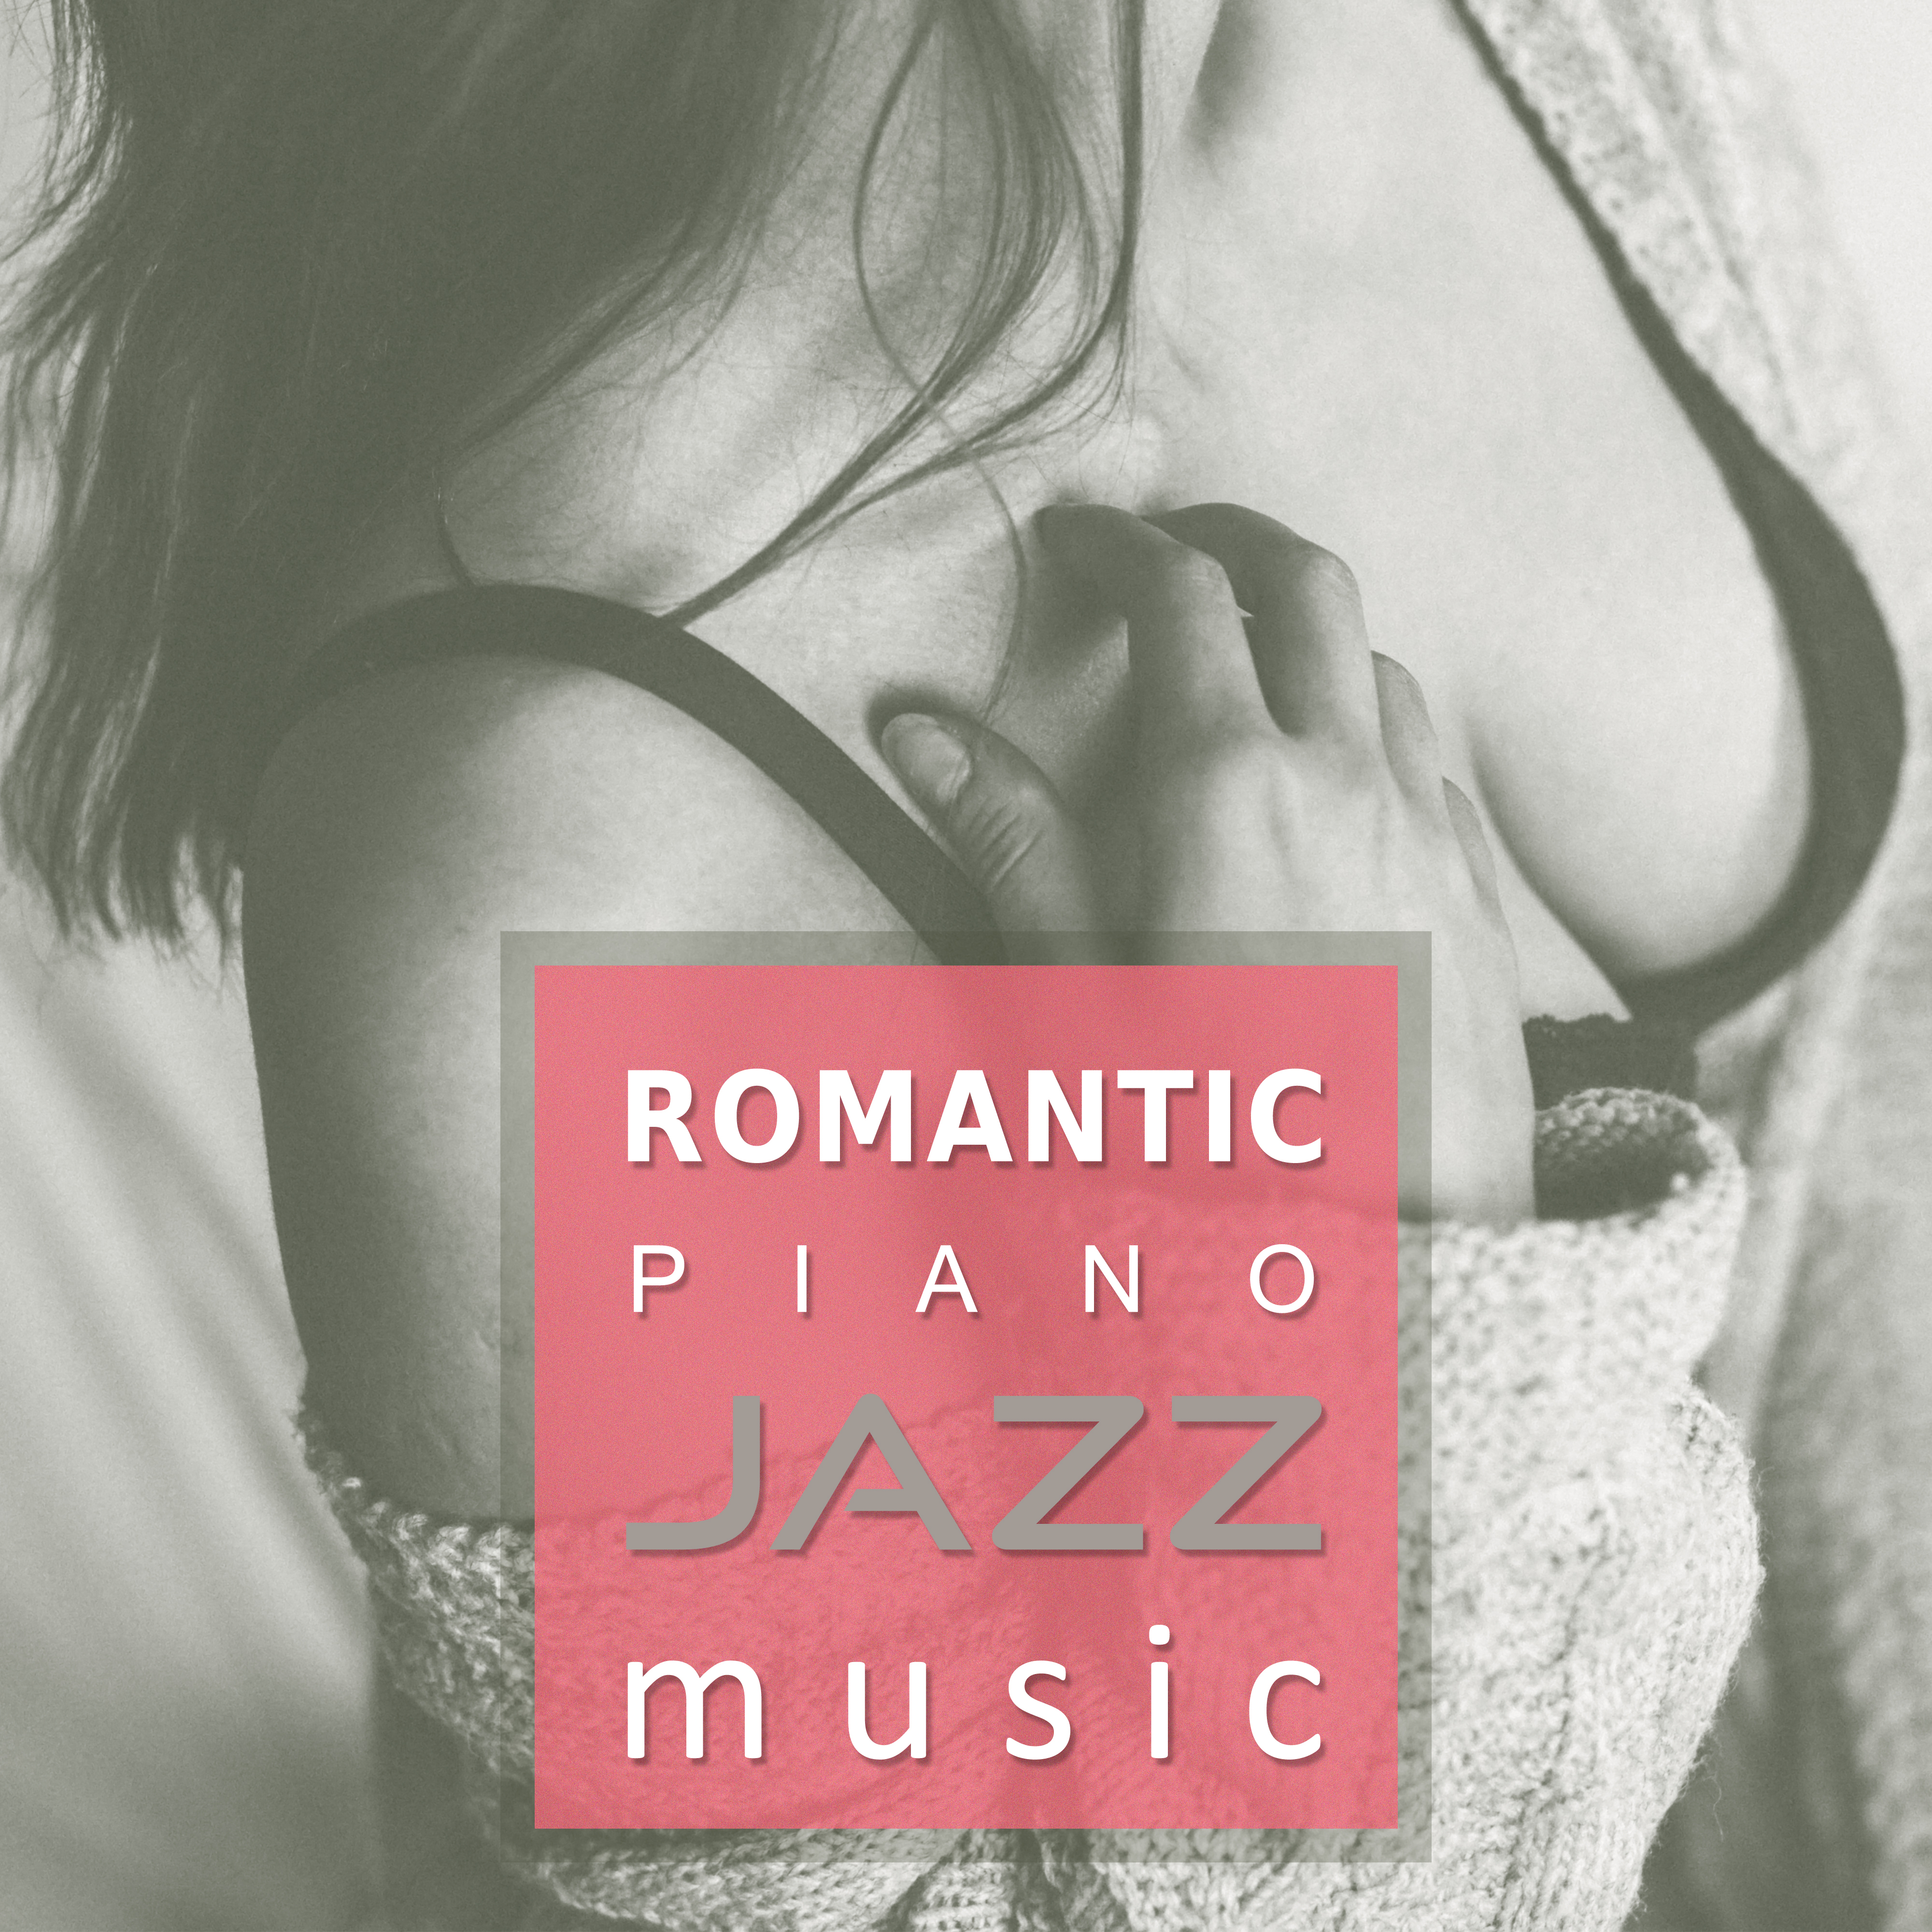 Romantic Piano Jazz Music  Beautiful Moments with Jazz, Best Romantic Music, Calming Sounds of Jazz